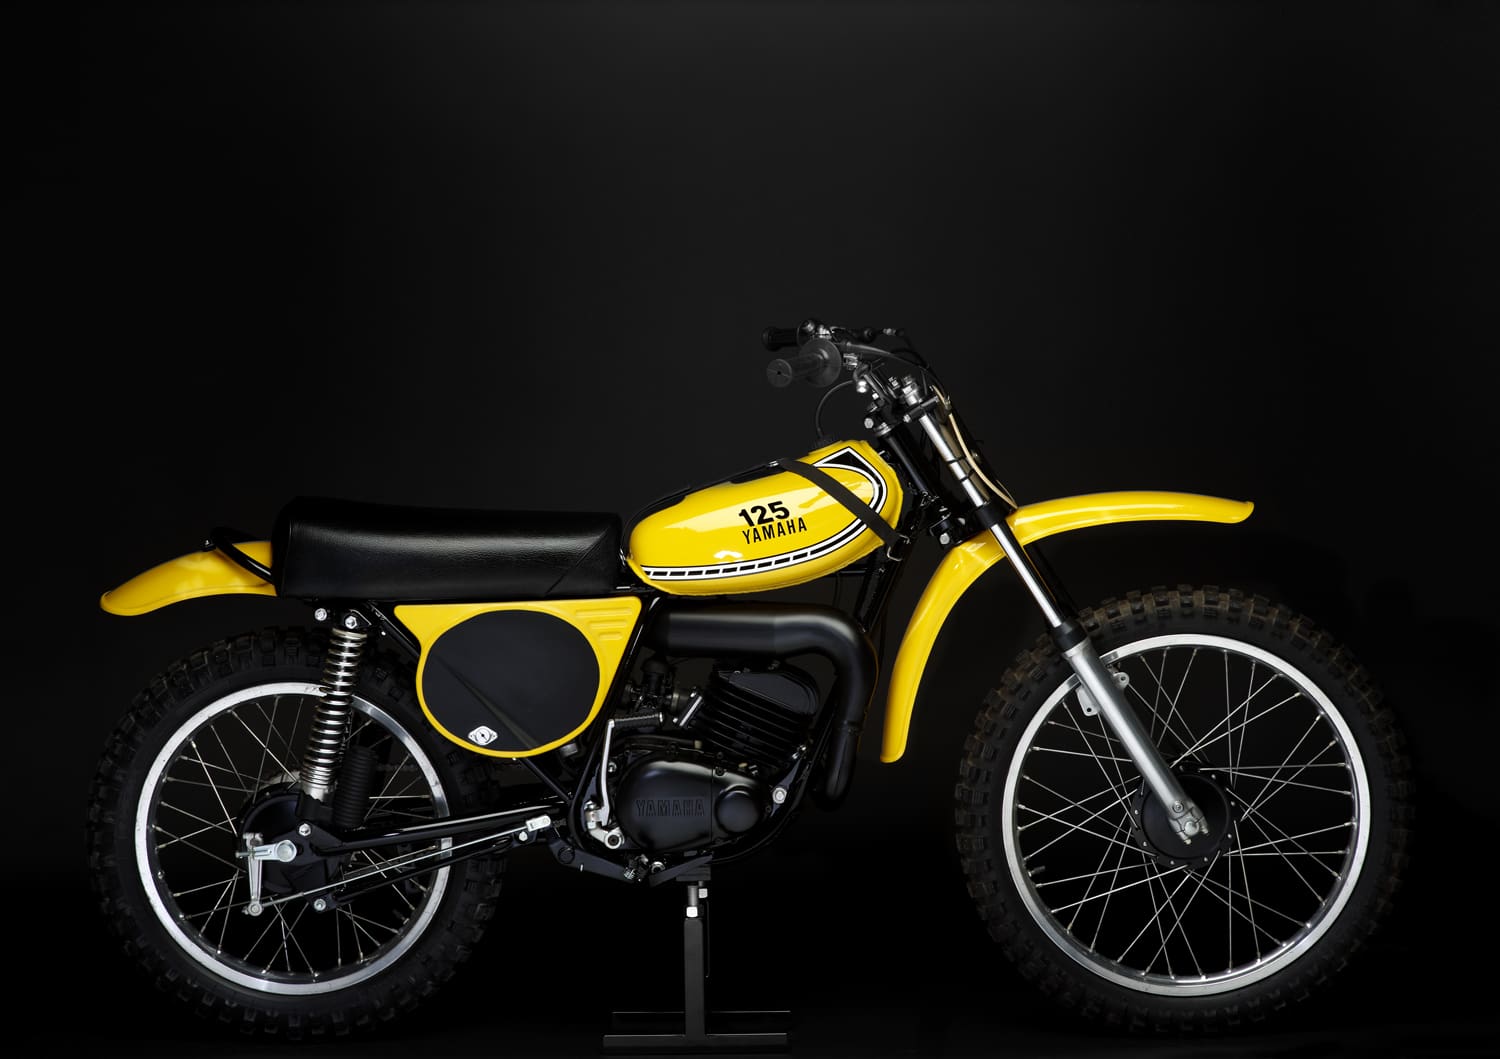 A yellow dirt bike sits on a black background.